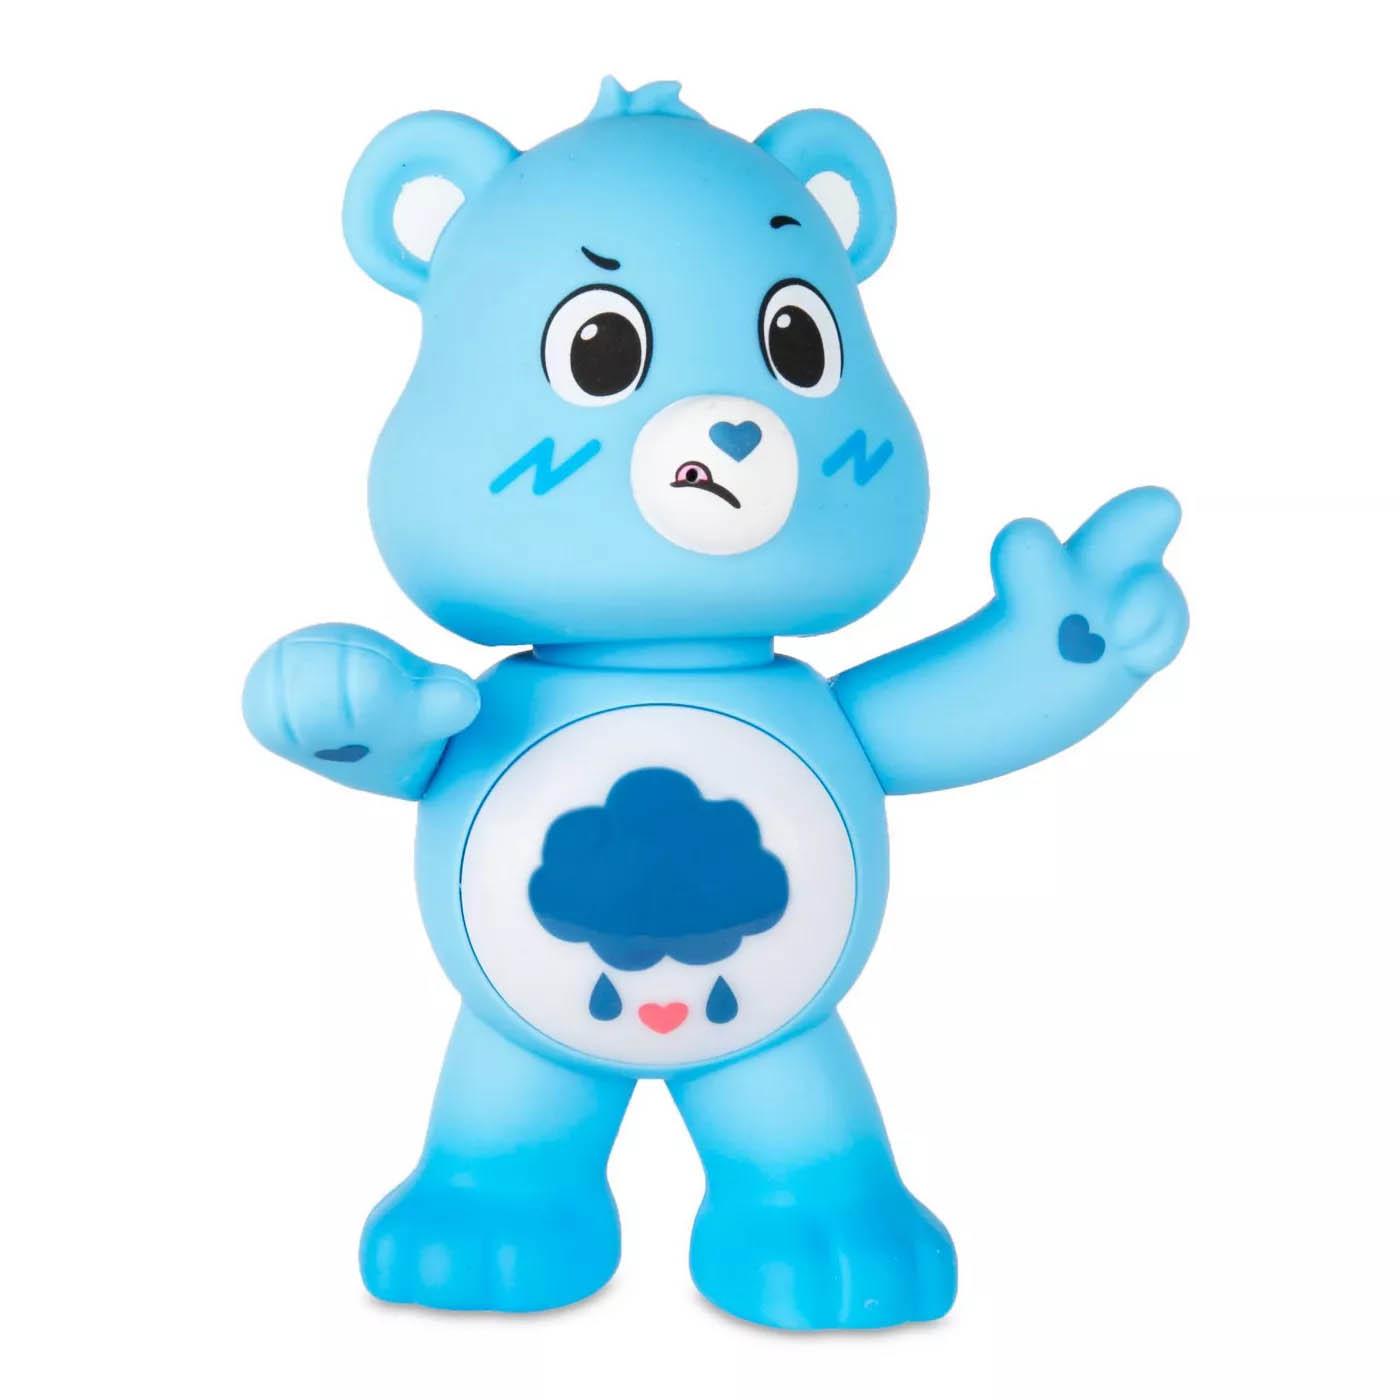 Care Bears 5in Interactive Collectible Figure for $4.44